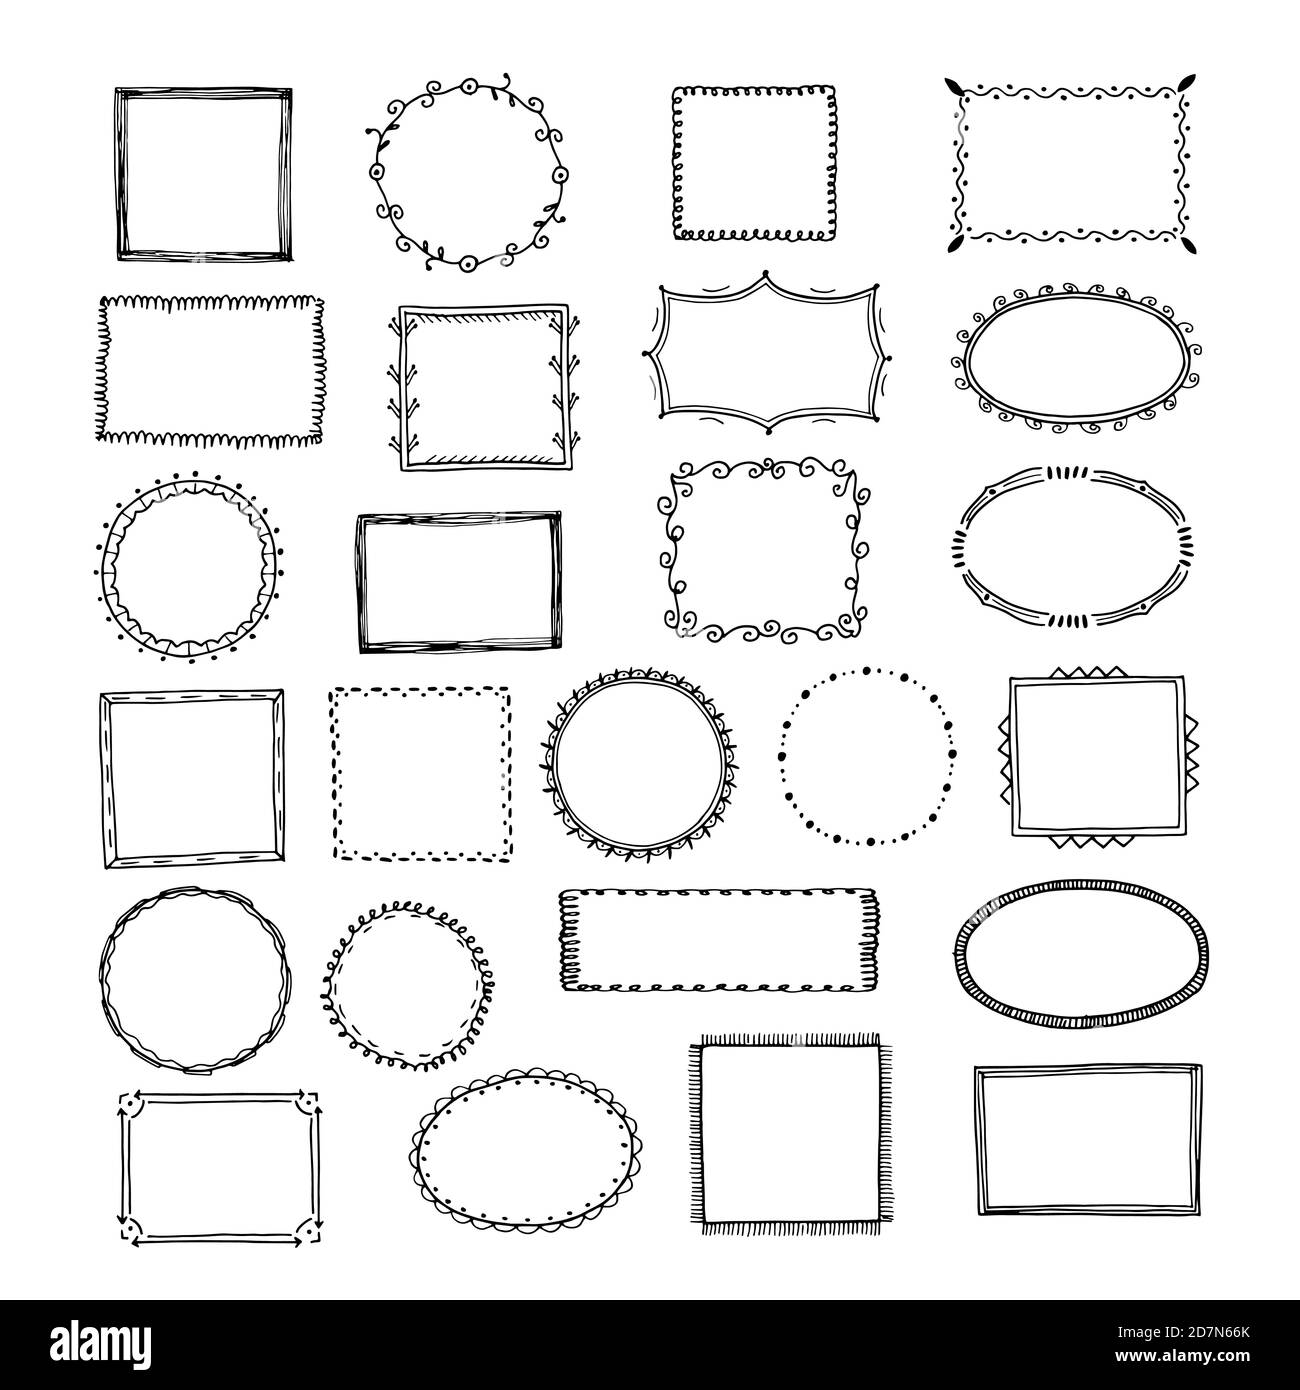 Doodle frames. Square borders sketch lines hand drawn round picture empty frame vintage vector set. Illustration of frame drawing picture, sketched rectangle box Stock Vector